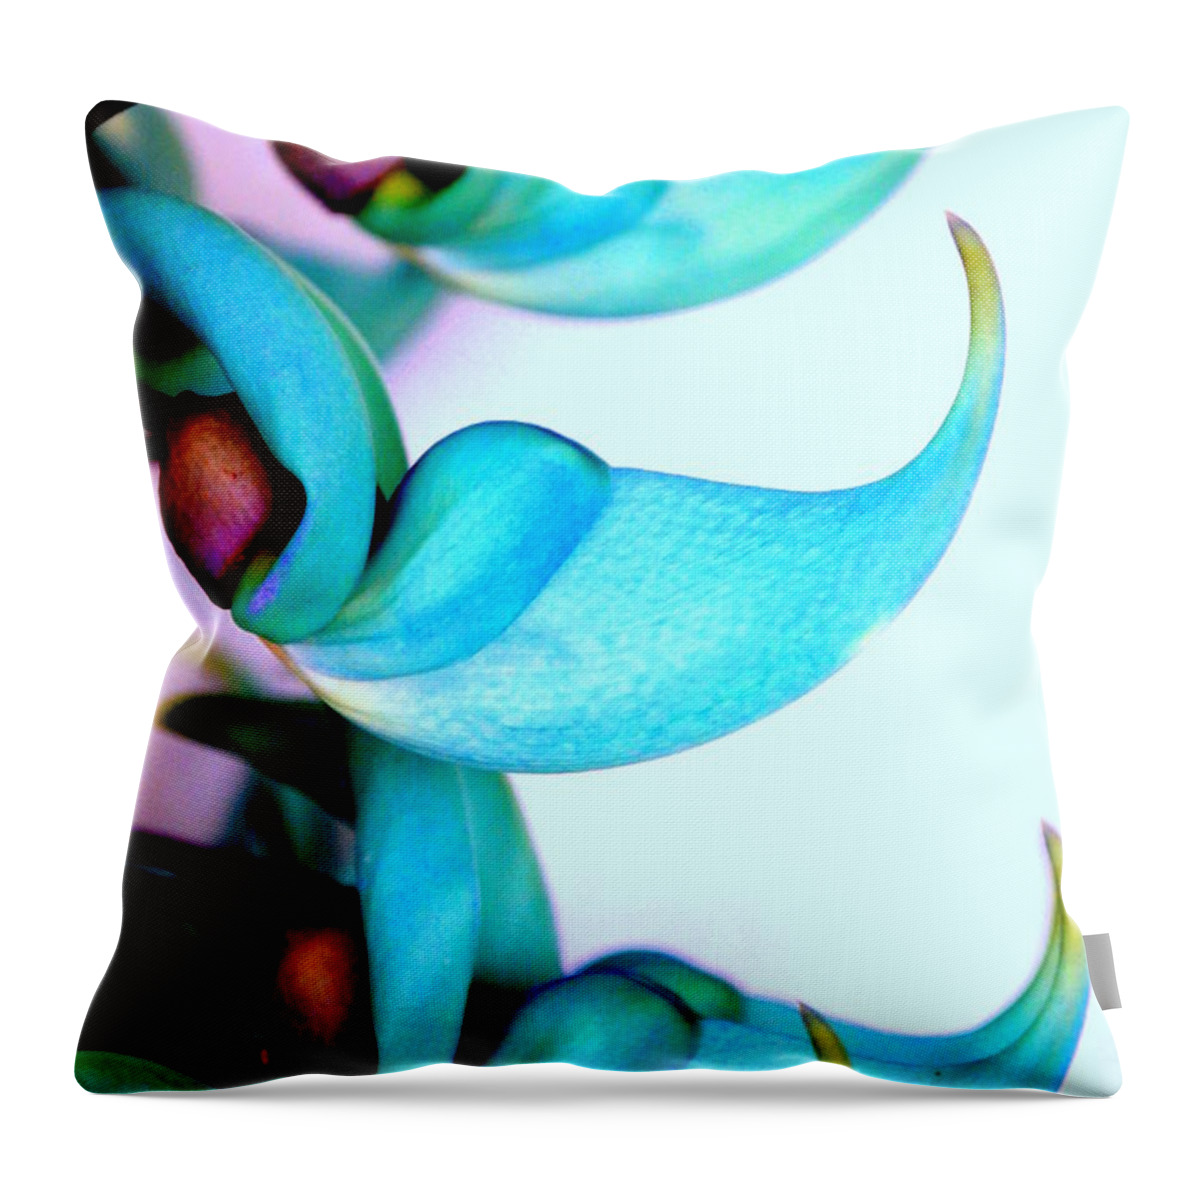 Jade Throw Pillow featuring the photograph Blue Jade Florets by Mary Deal